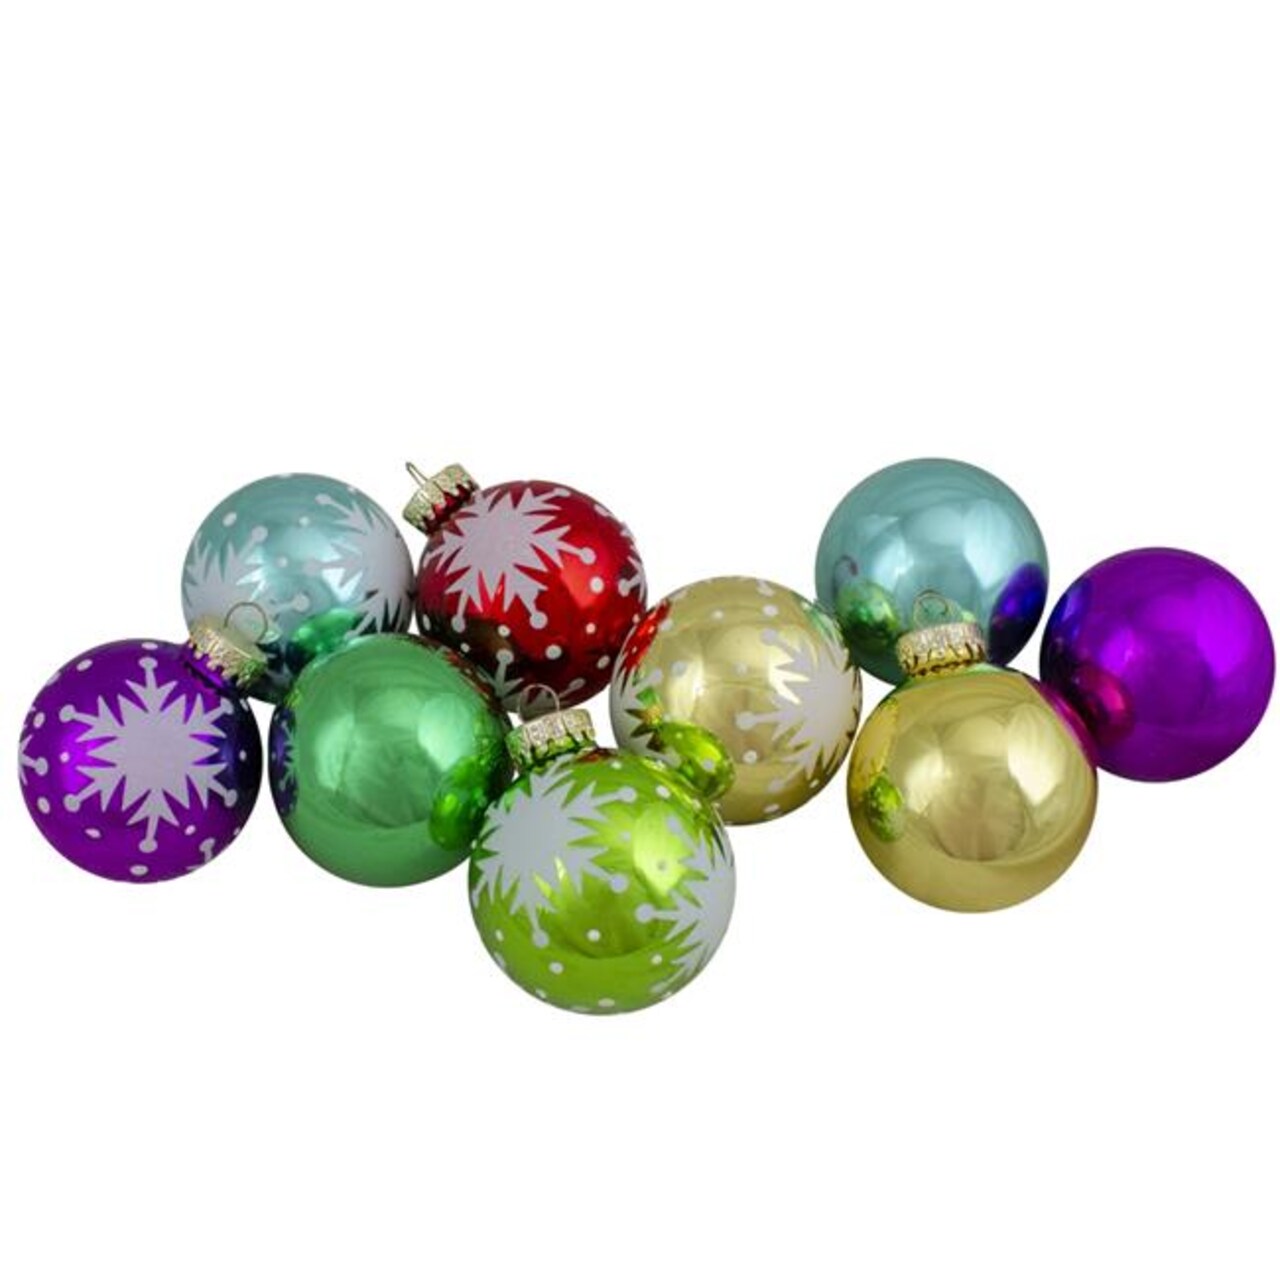 NorthLight 34313357 2.25 in. Glass Ball Hanging Christmas Ball Ornaments, Assorted Color - Set of 9